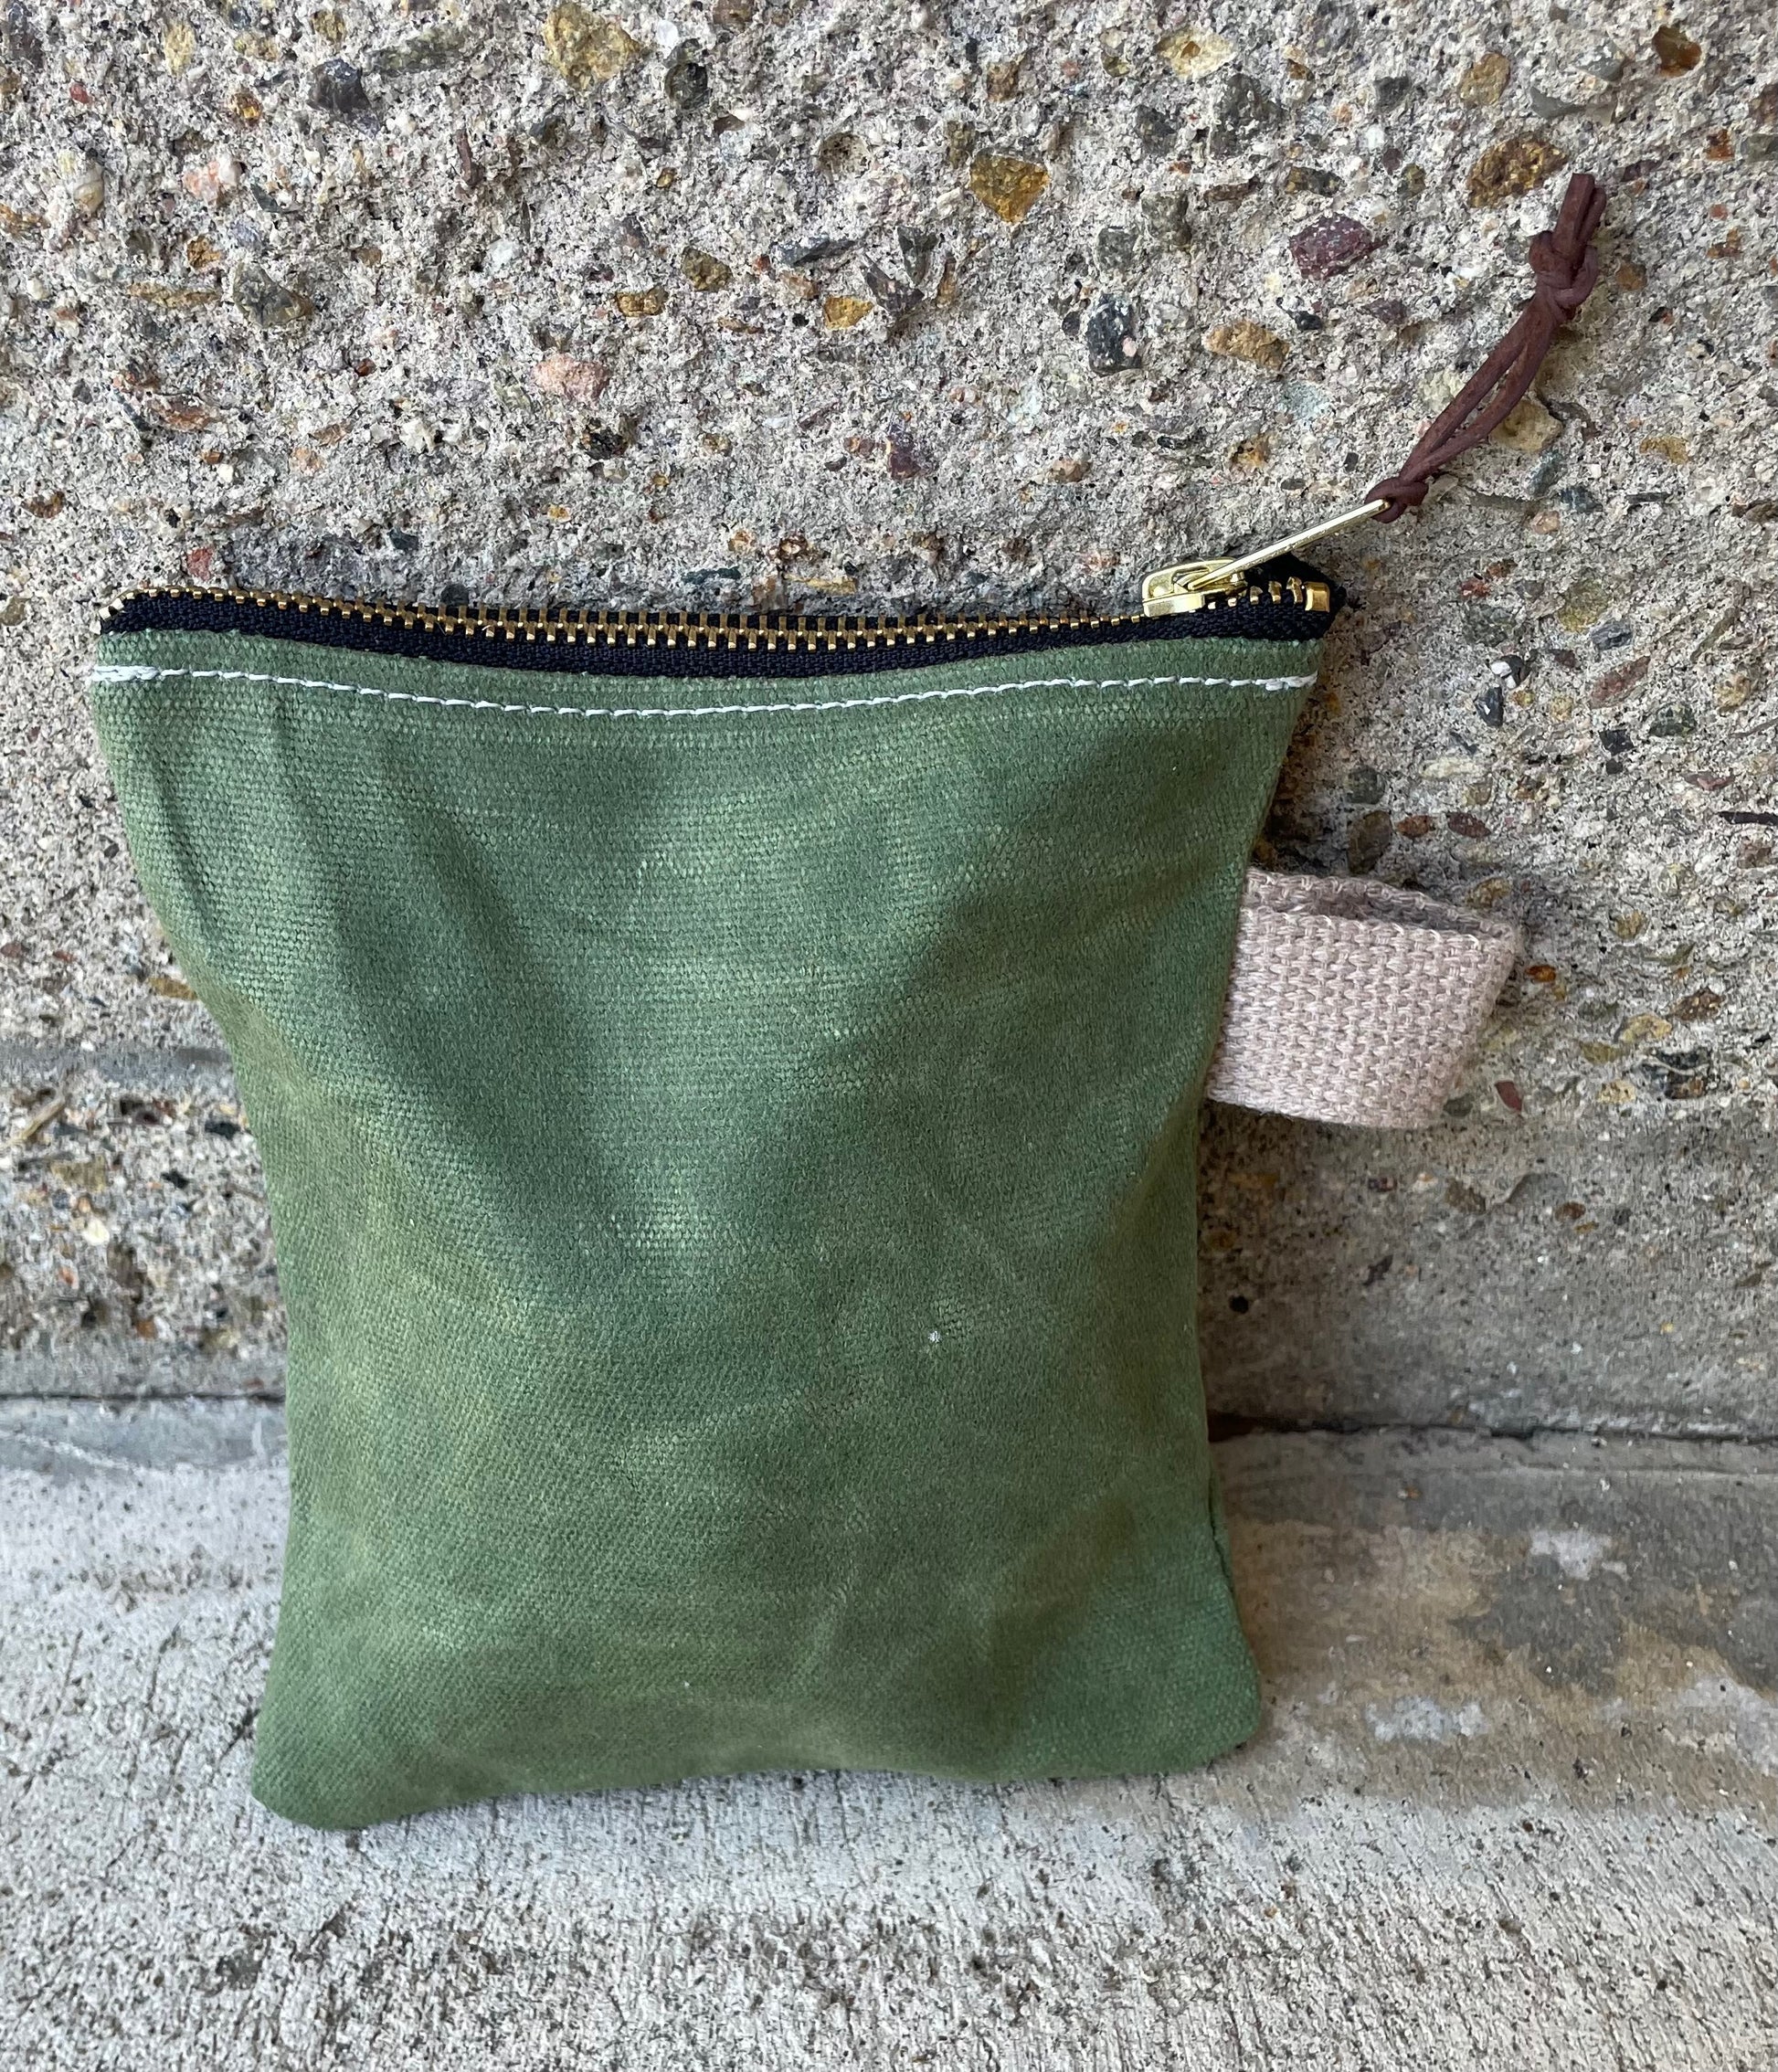 Rear view of a small ditty bag made of waxed canvas with a small handle.